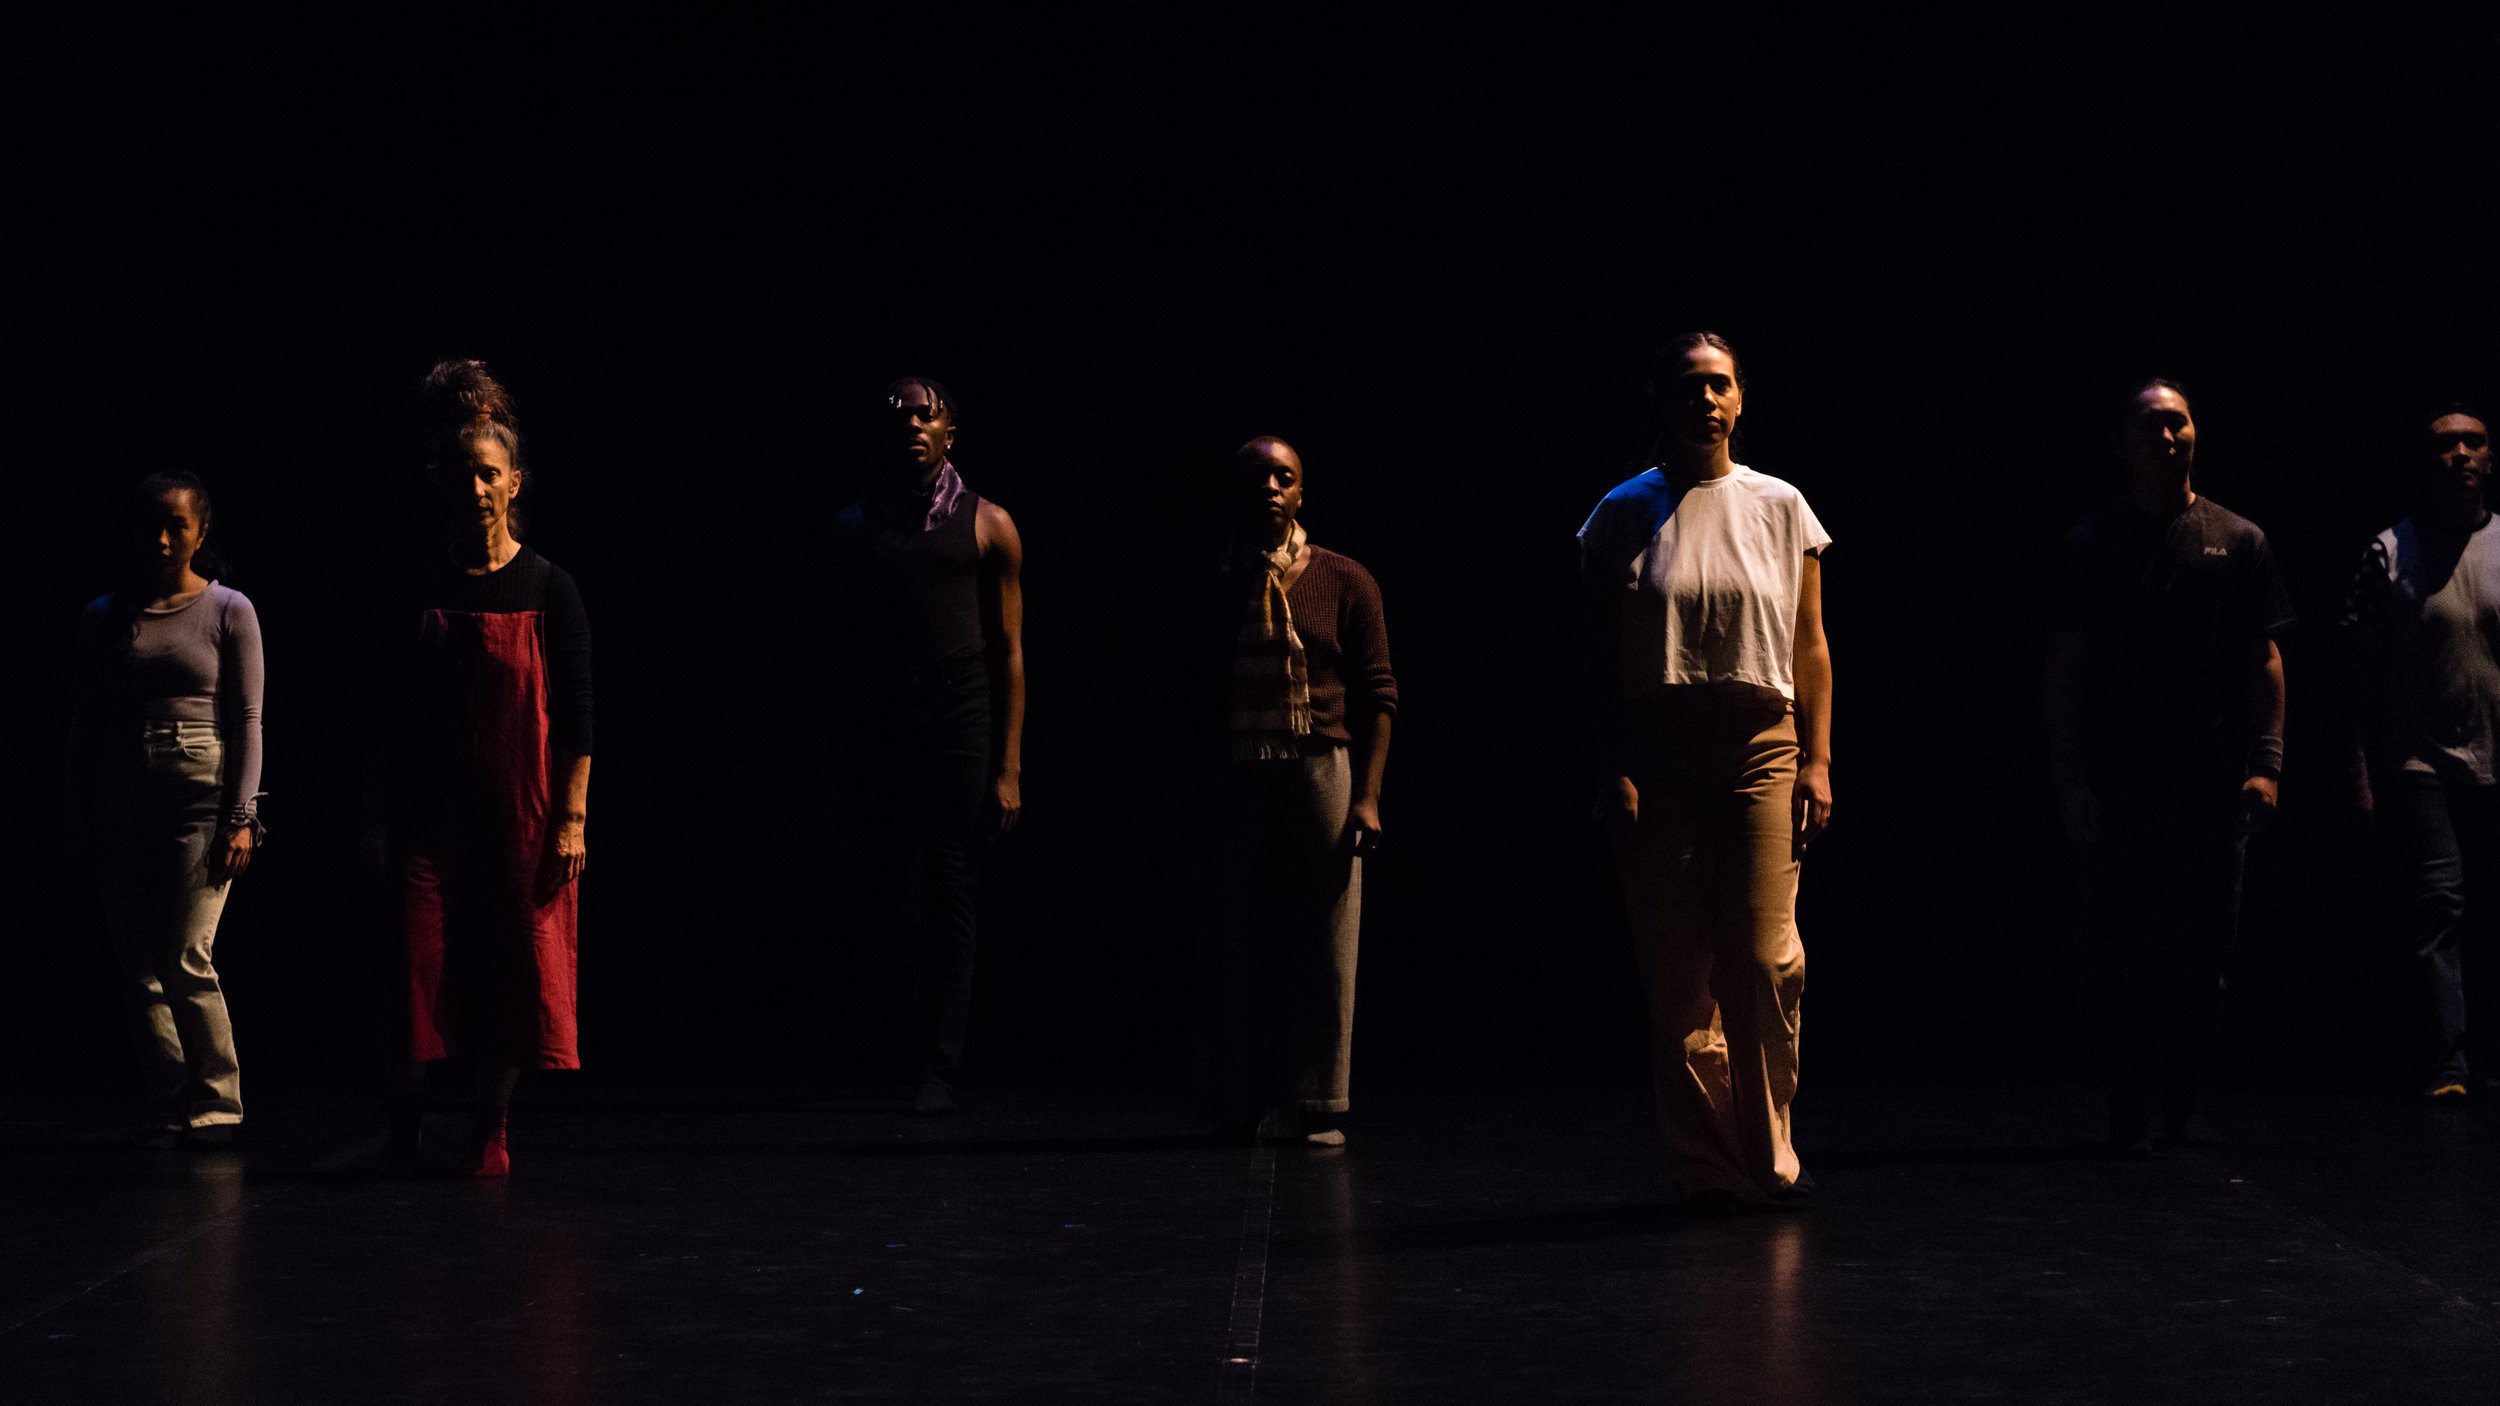  The full cast of I am the Child of… walk forward in a straight line that extends across the stage horizontally. The lighting is dark and shadowy. The performers have serious facial expressions and are diverse in age, gender, and ethnicity. 